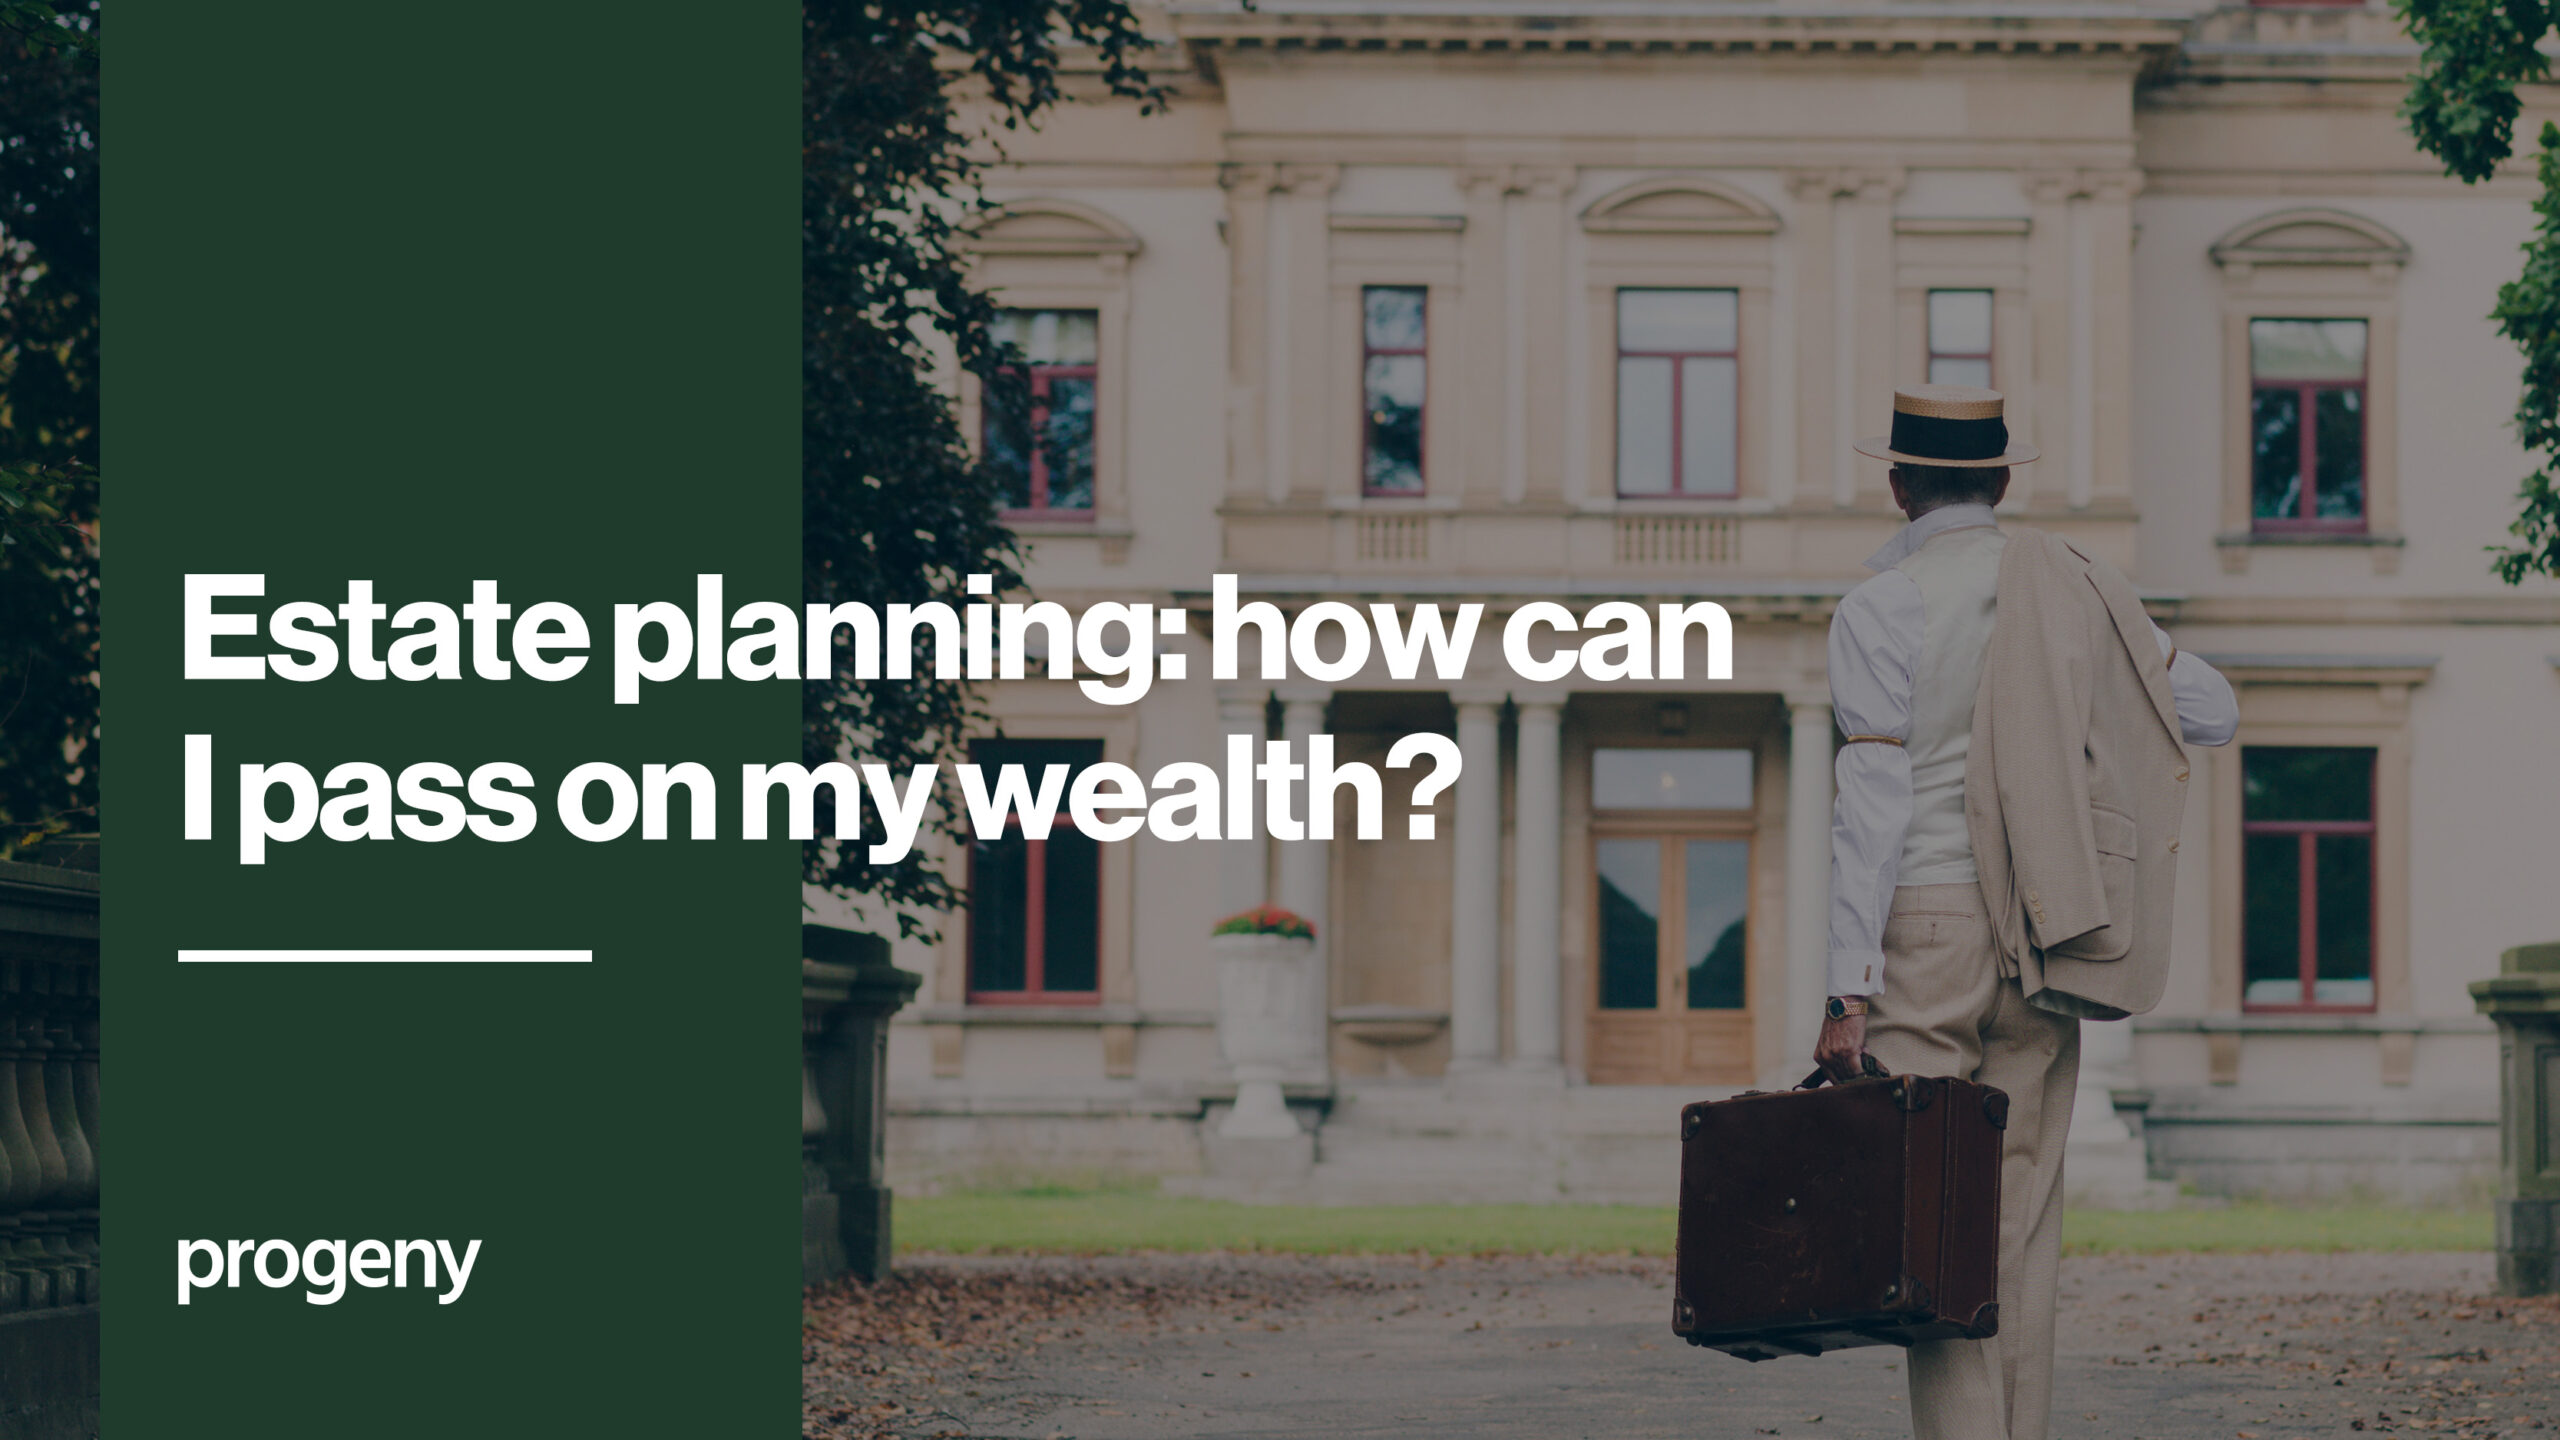 Estate planning- how can I pass on my wealth